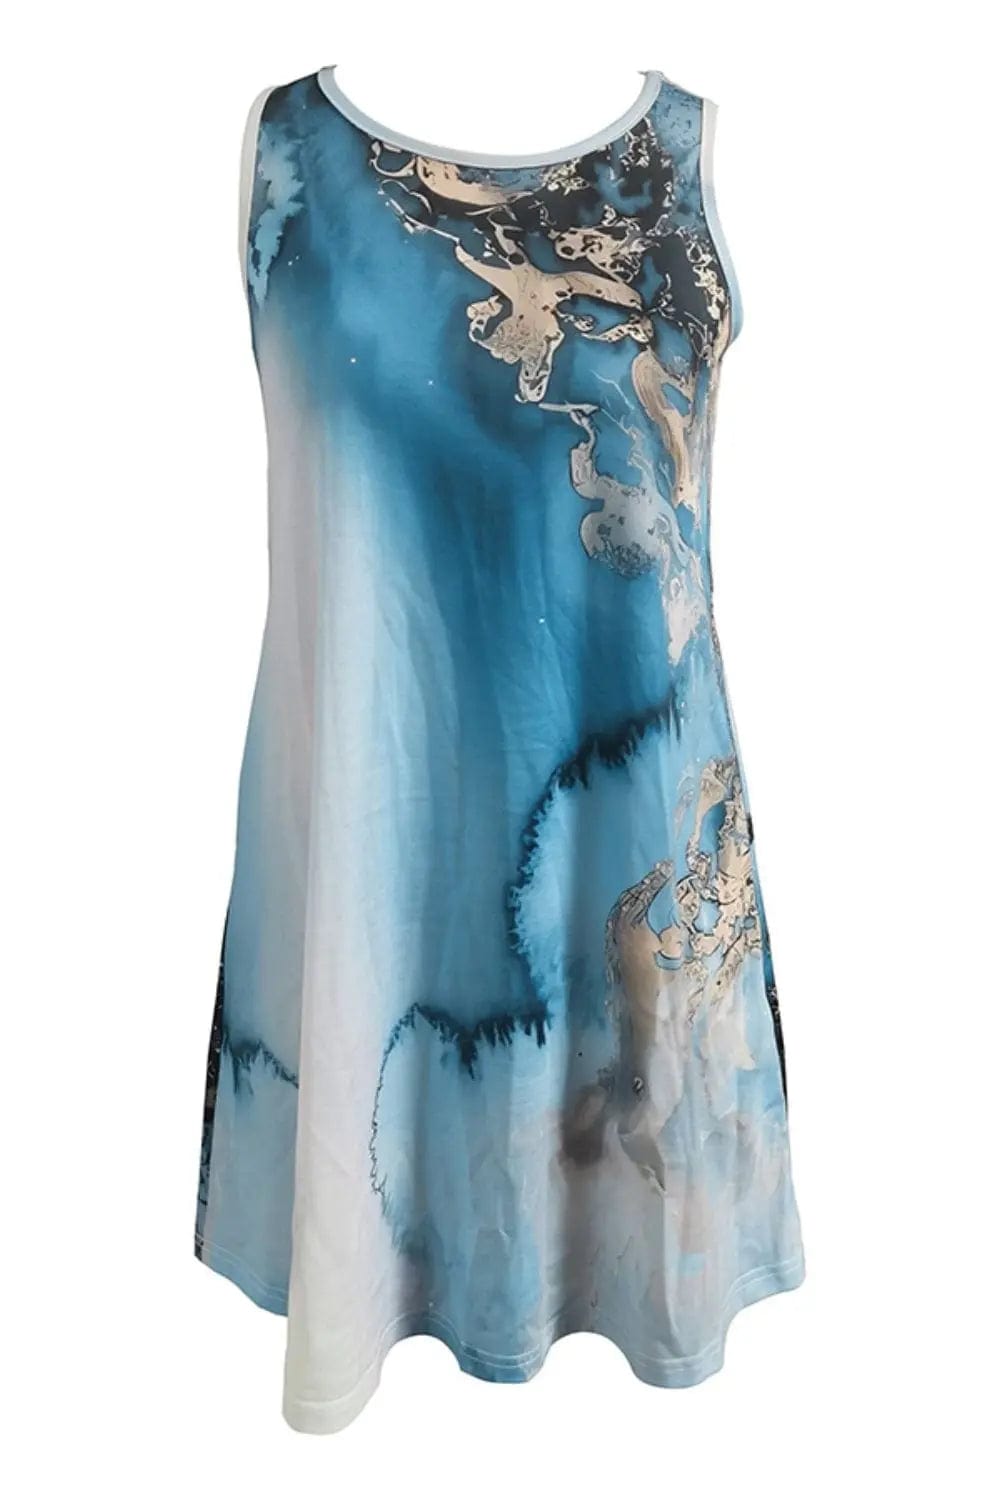 Abstract Print Round Neck Sleeveless Dress with Pockets  21.00 MPGD Corp Merchandise